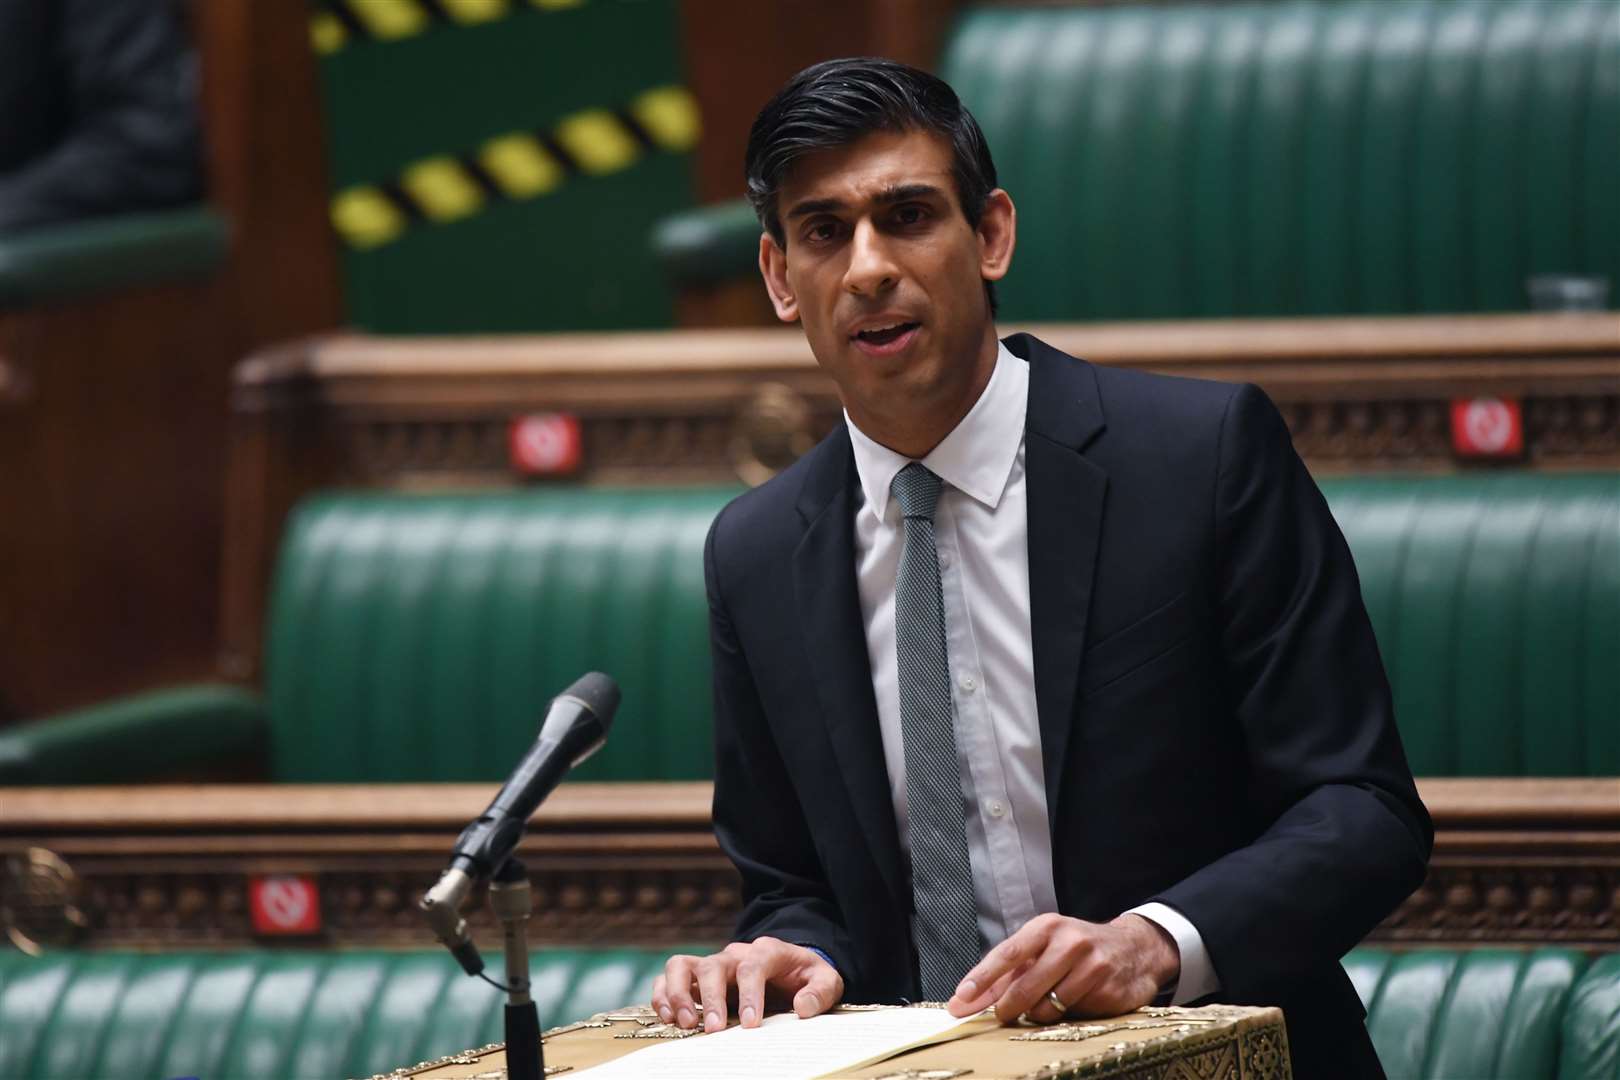 Chancellor Rishi Sunak’s contact with David Cameron over Greensill has come under scrutiny (UK Parliament/Jessica Taylor)